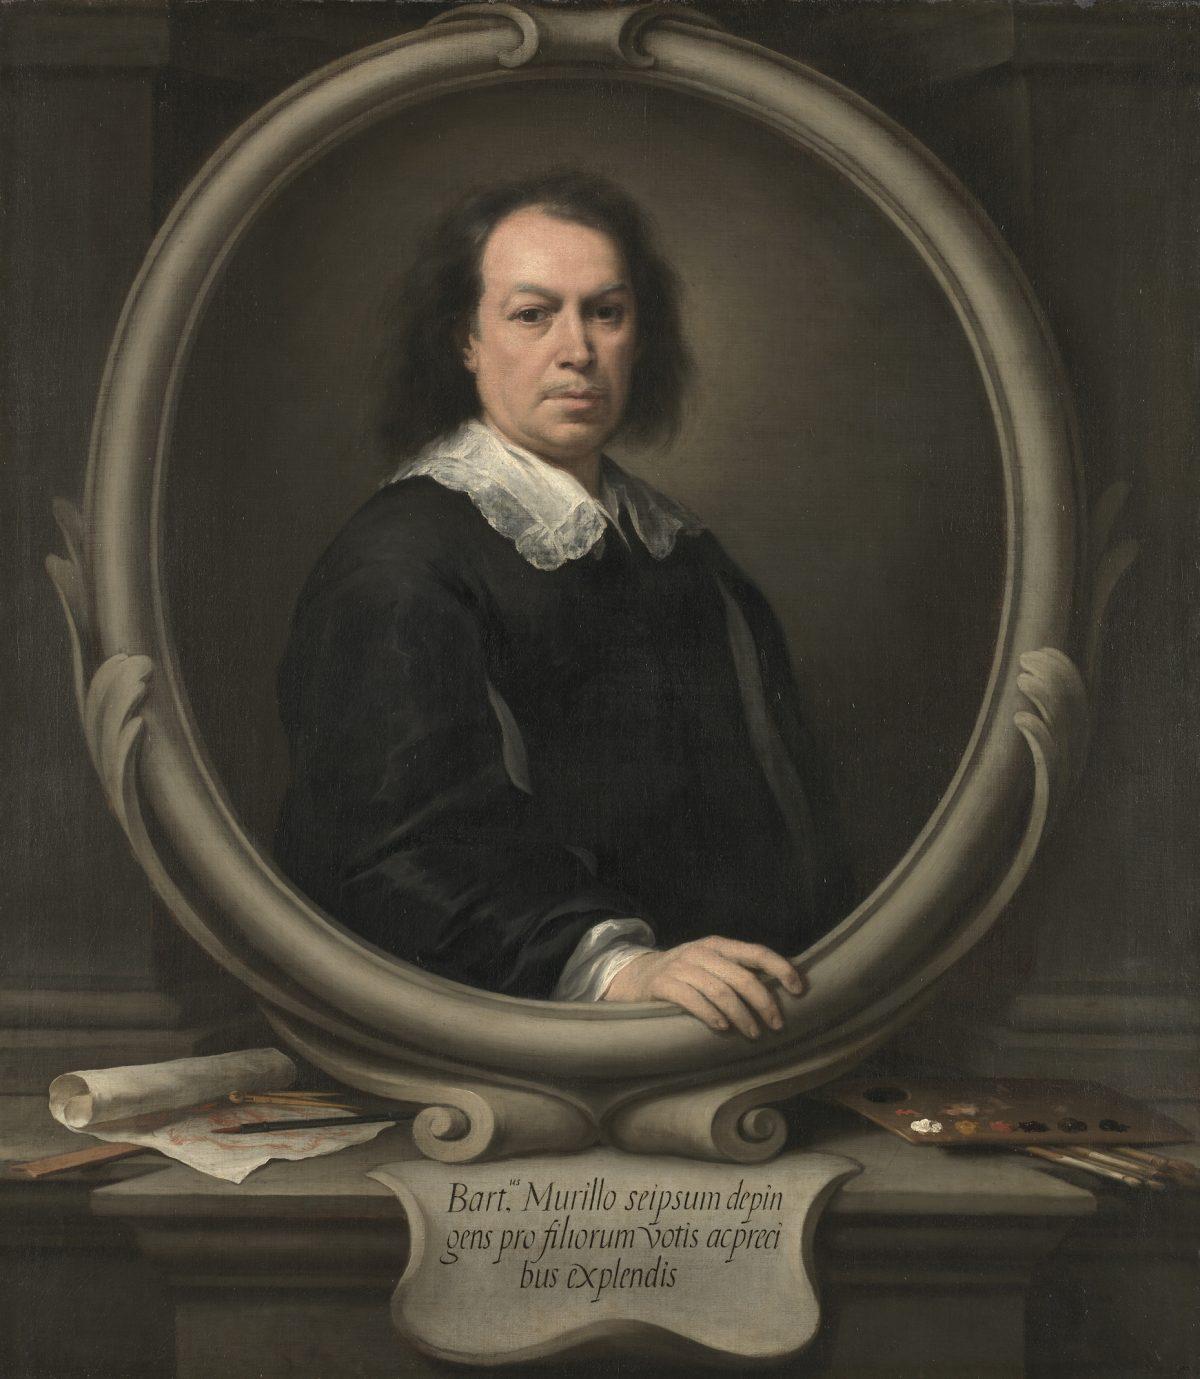 Self-Portrait, circa 1670, by Bartolomé Esteban Murillo. Oil on canvas, 48 1/16 inches by 42 1/8 inches. The National Gallery, London, bought, 1953. (The National Gallery, London)